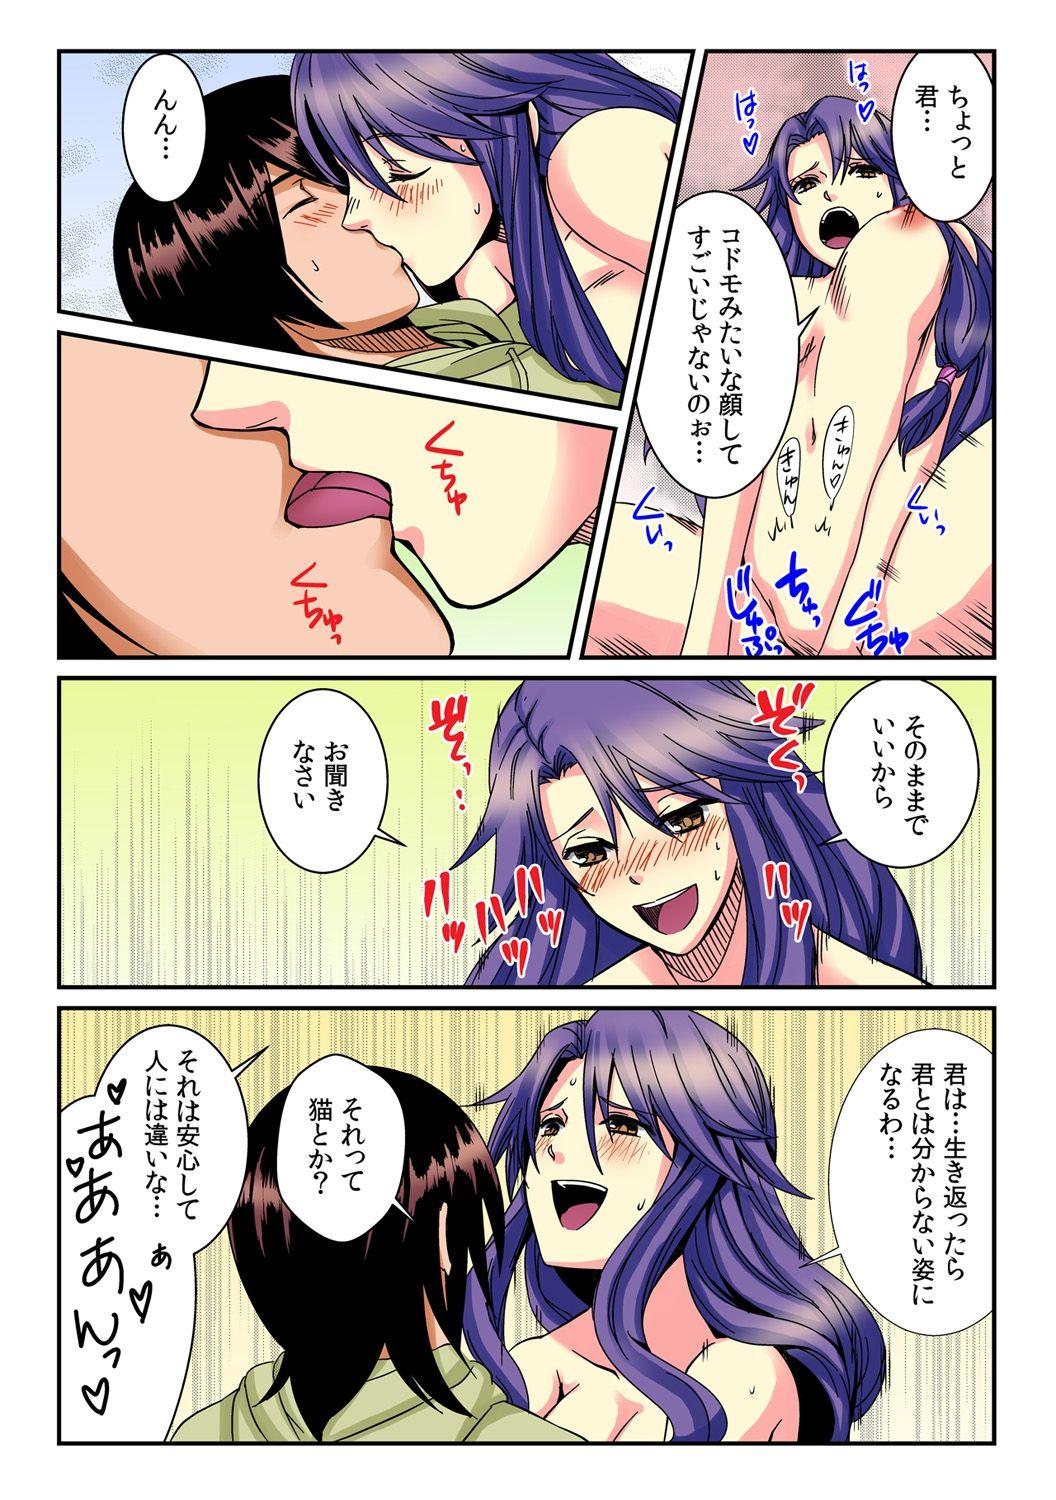 Fuck Porn [Akagi Gijou / Akahige] I became a girl- and I definitely can't let anyone find out! (Full color) 1 Reverse Cowgirl - Page 10